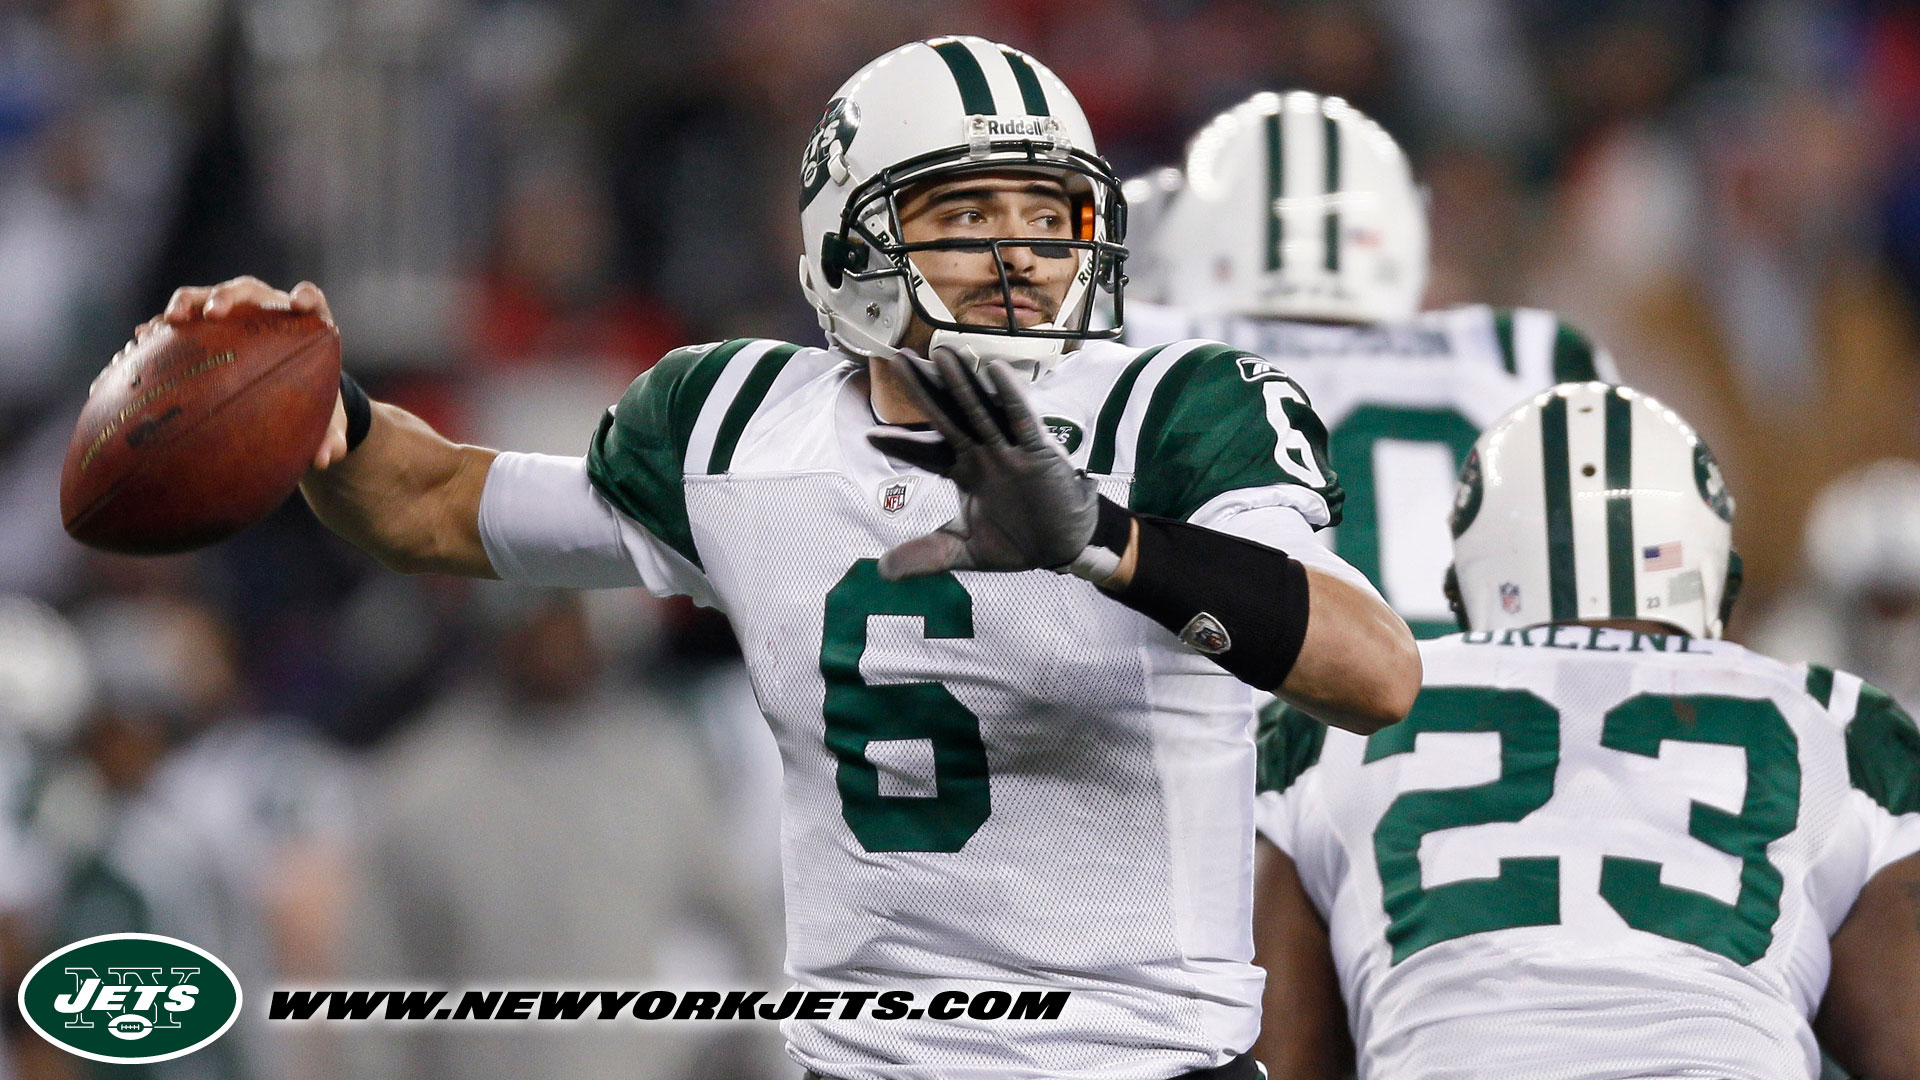 Download 'New York Jets' wallpapers for mobile phone, free 'New York Jets'  HD pictures